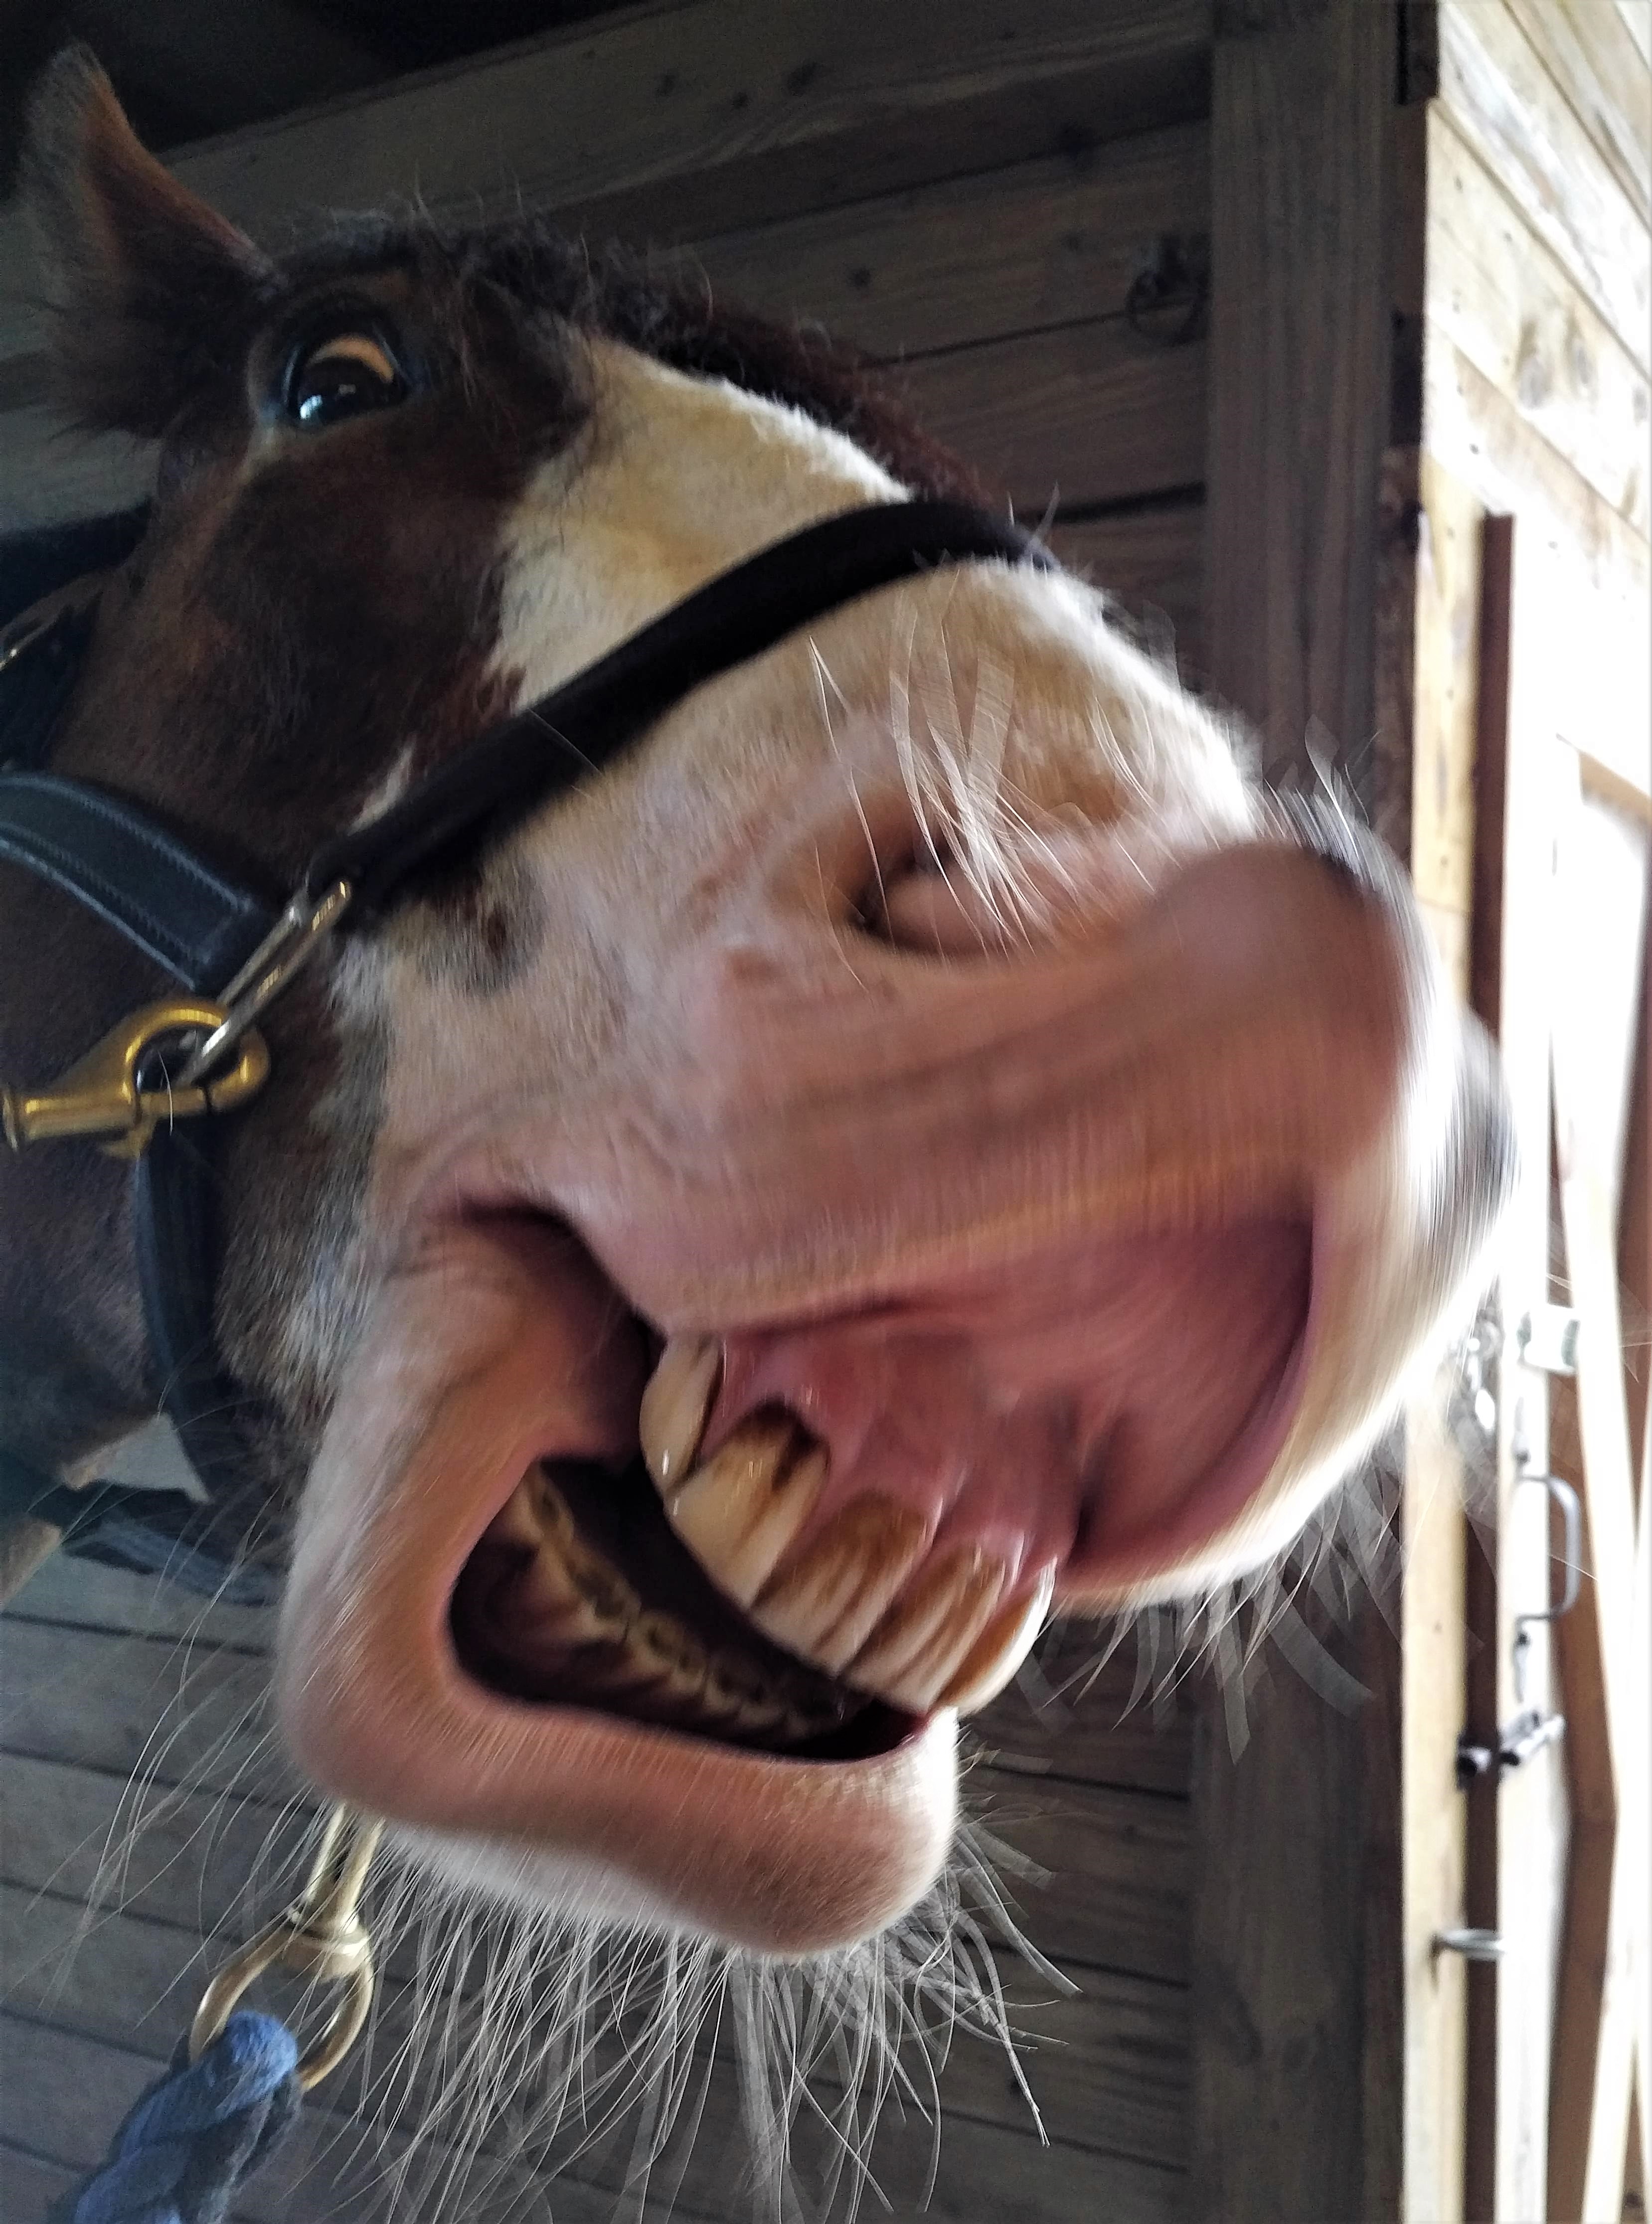 Monday Minstrel: From the Horse’s POV.